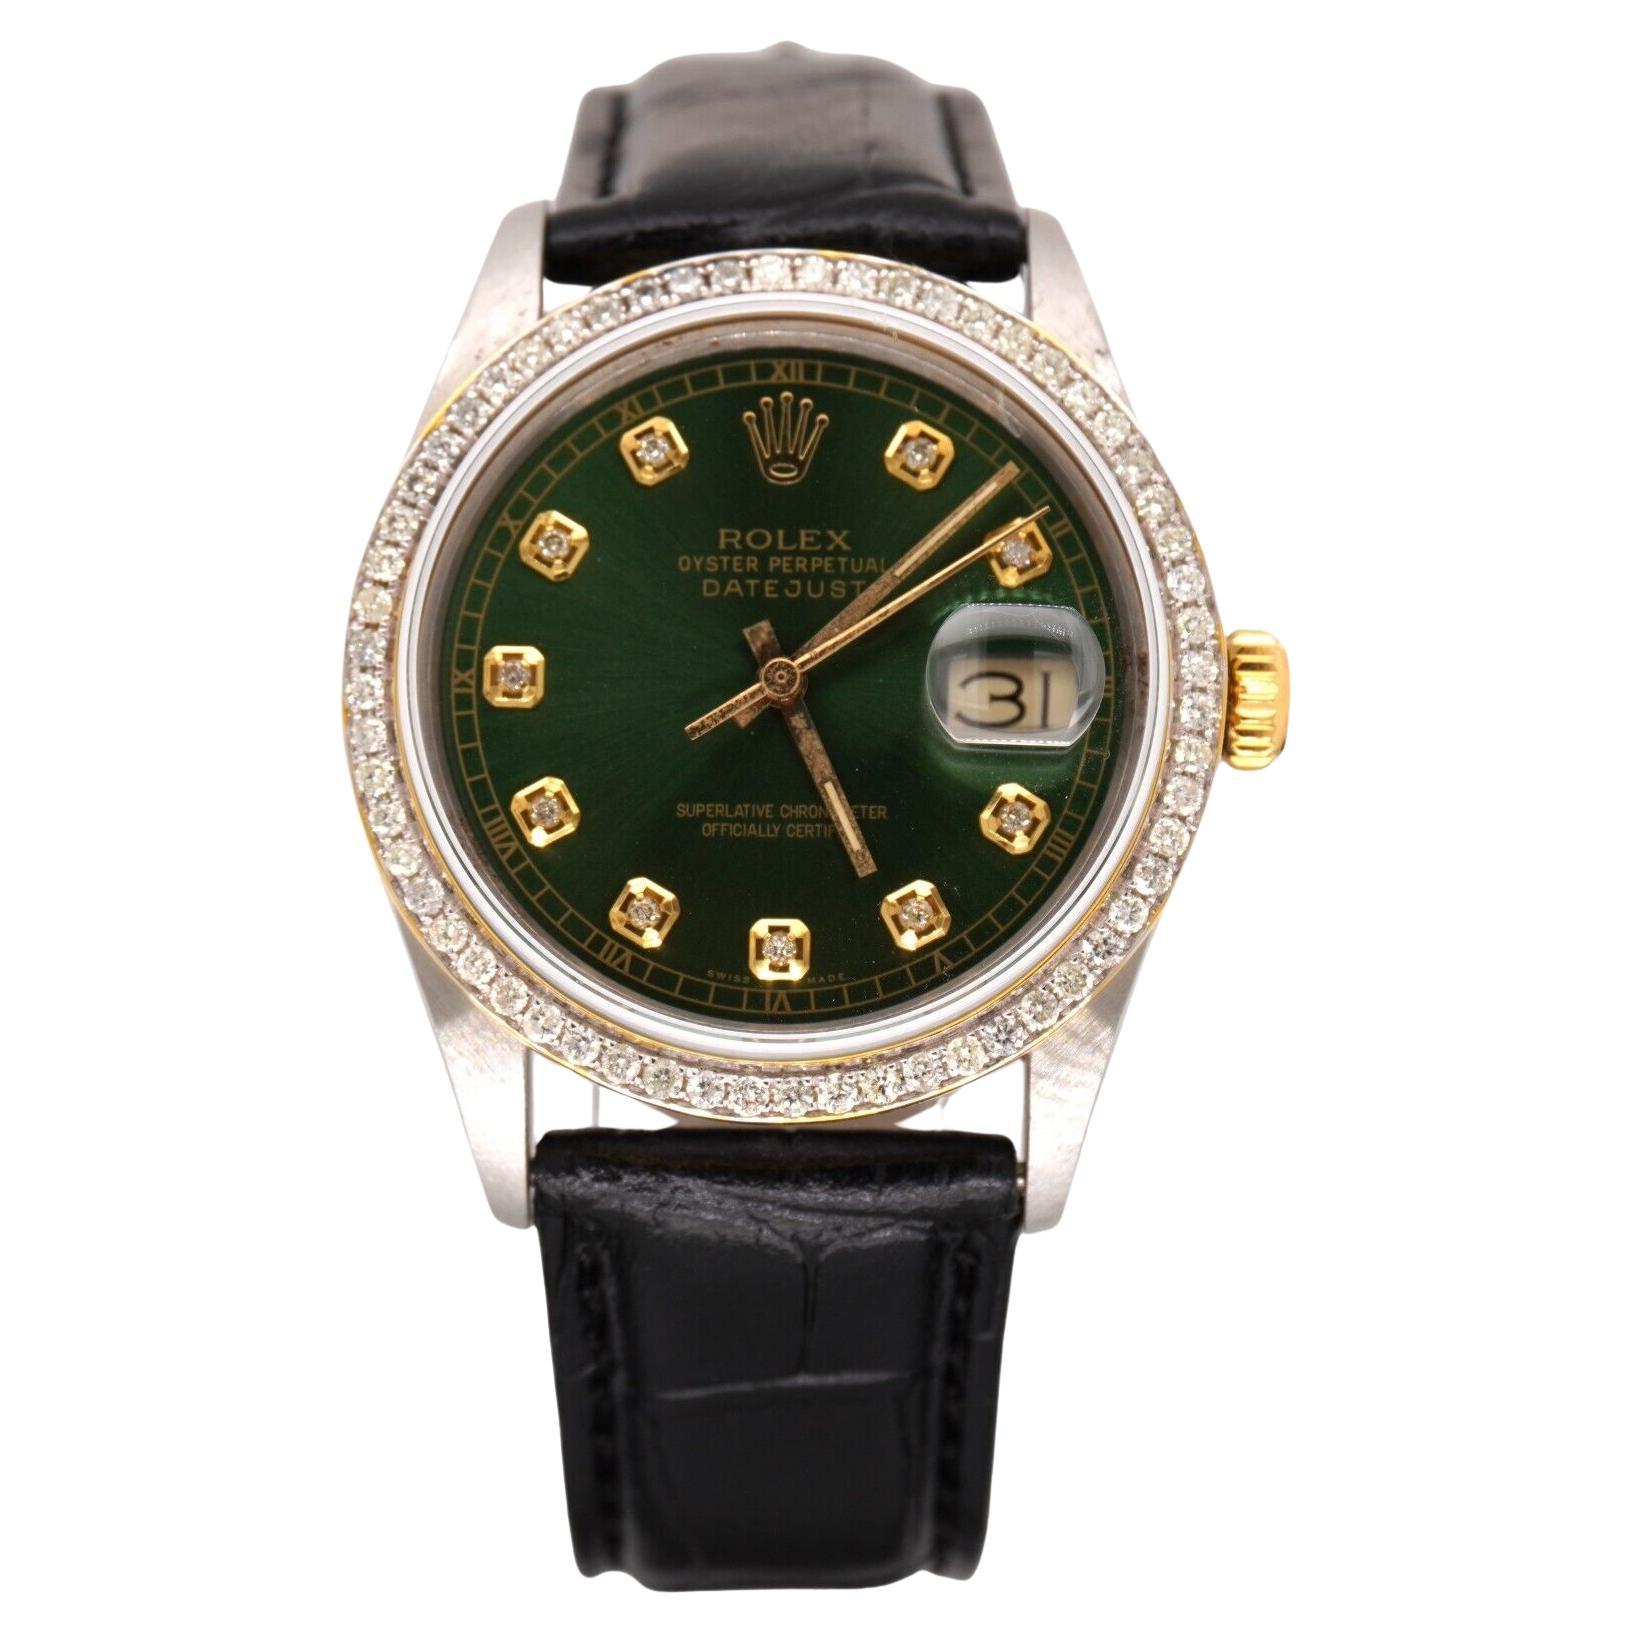 Rolex Mens Datejust 36mm Gold/Steel ICED 1.75ct Diamond Green Dial Watch Leather